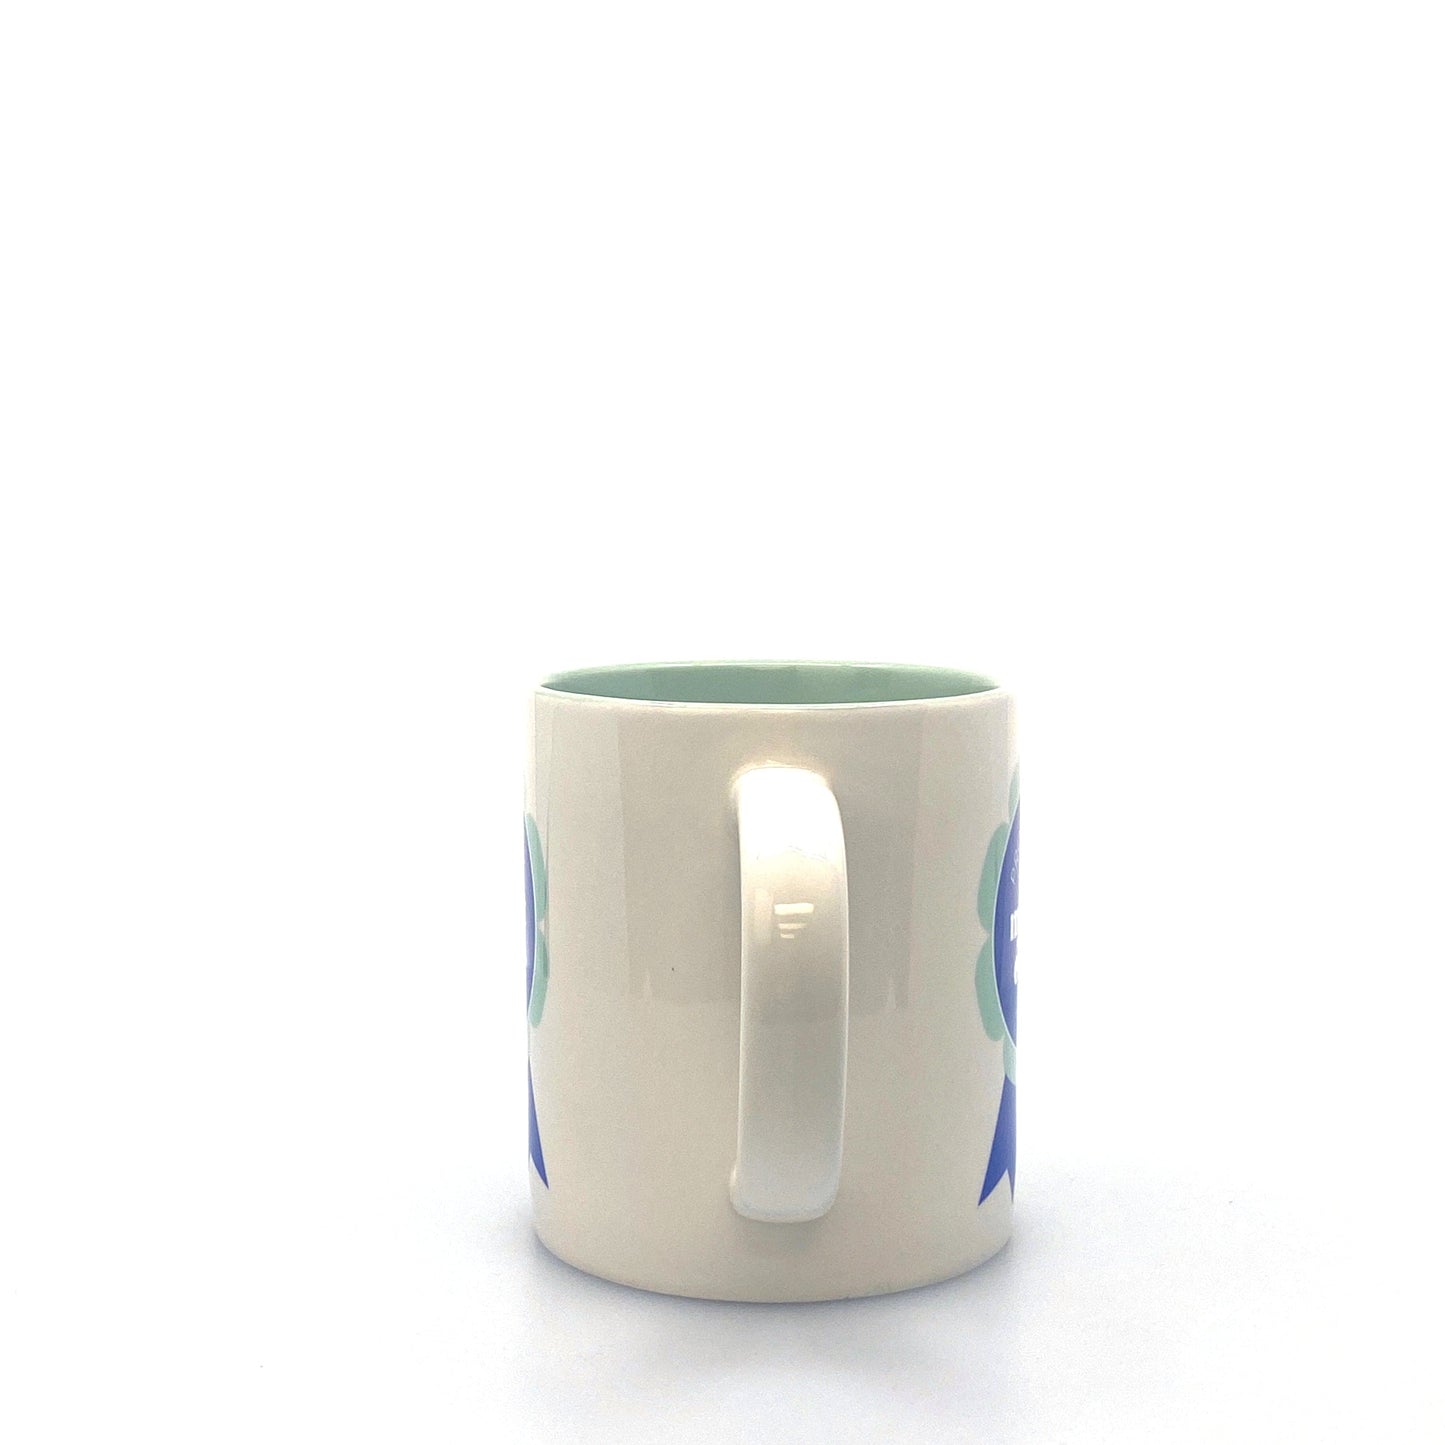 Professional “per my last email” Sender Coffee Cup 16 Oz